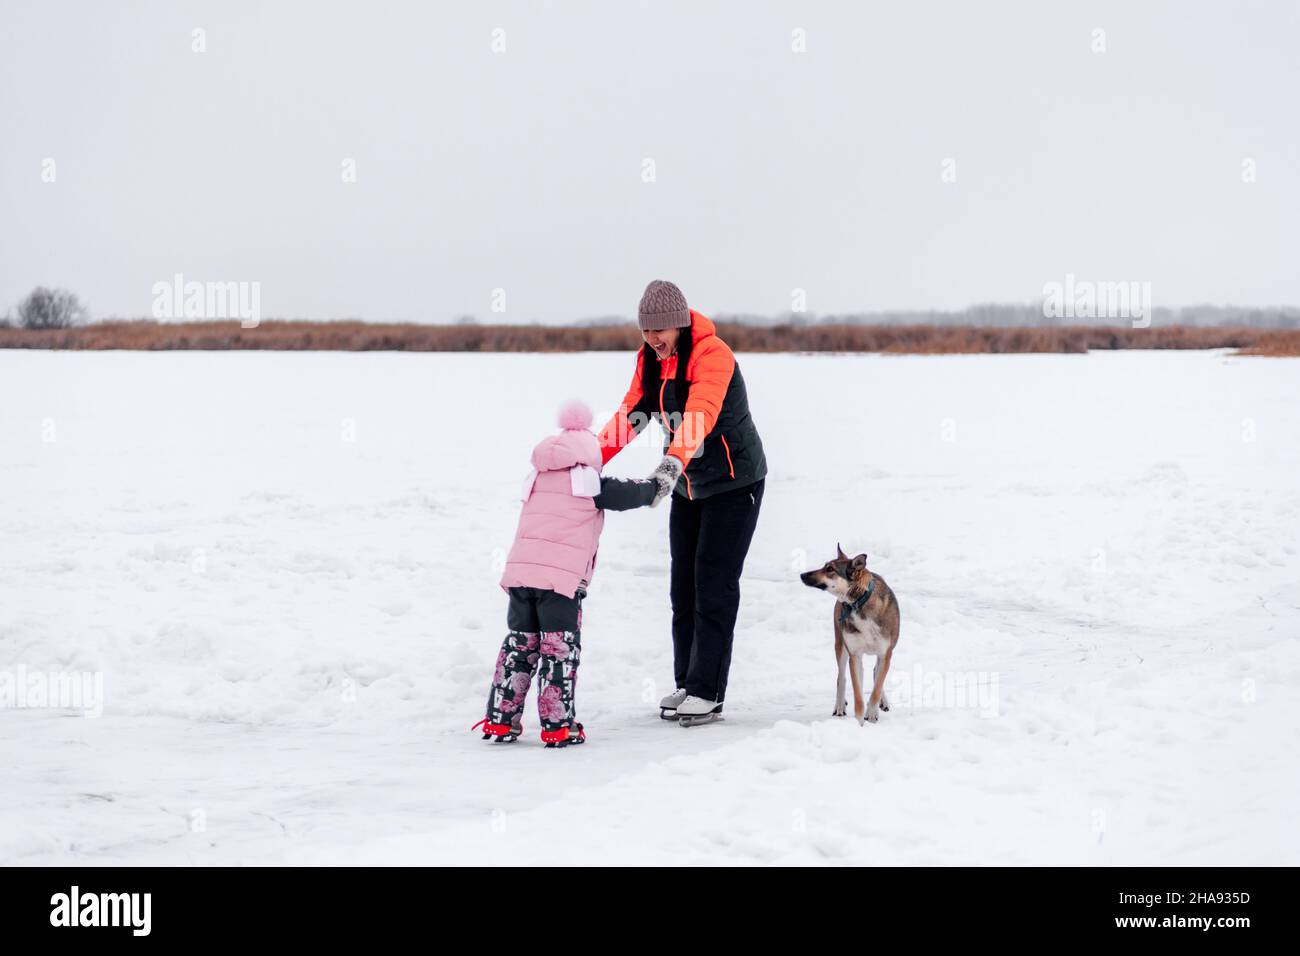 Family on walk in winter. Young woman teaches little girl to skate on frozen lake on frosty winter day, big dog is playing nearby Stock Photo